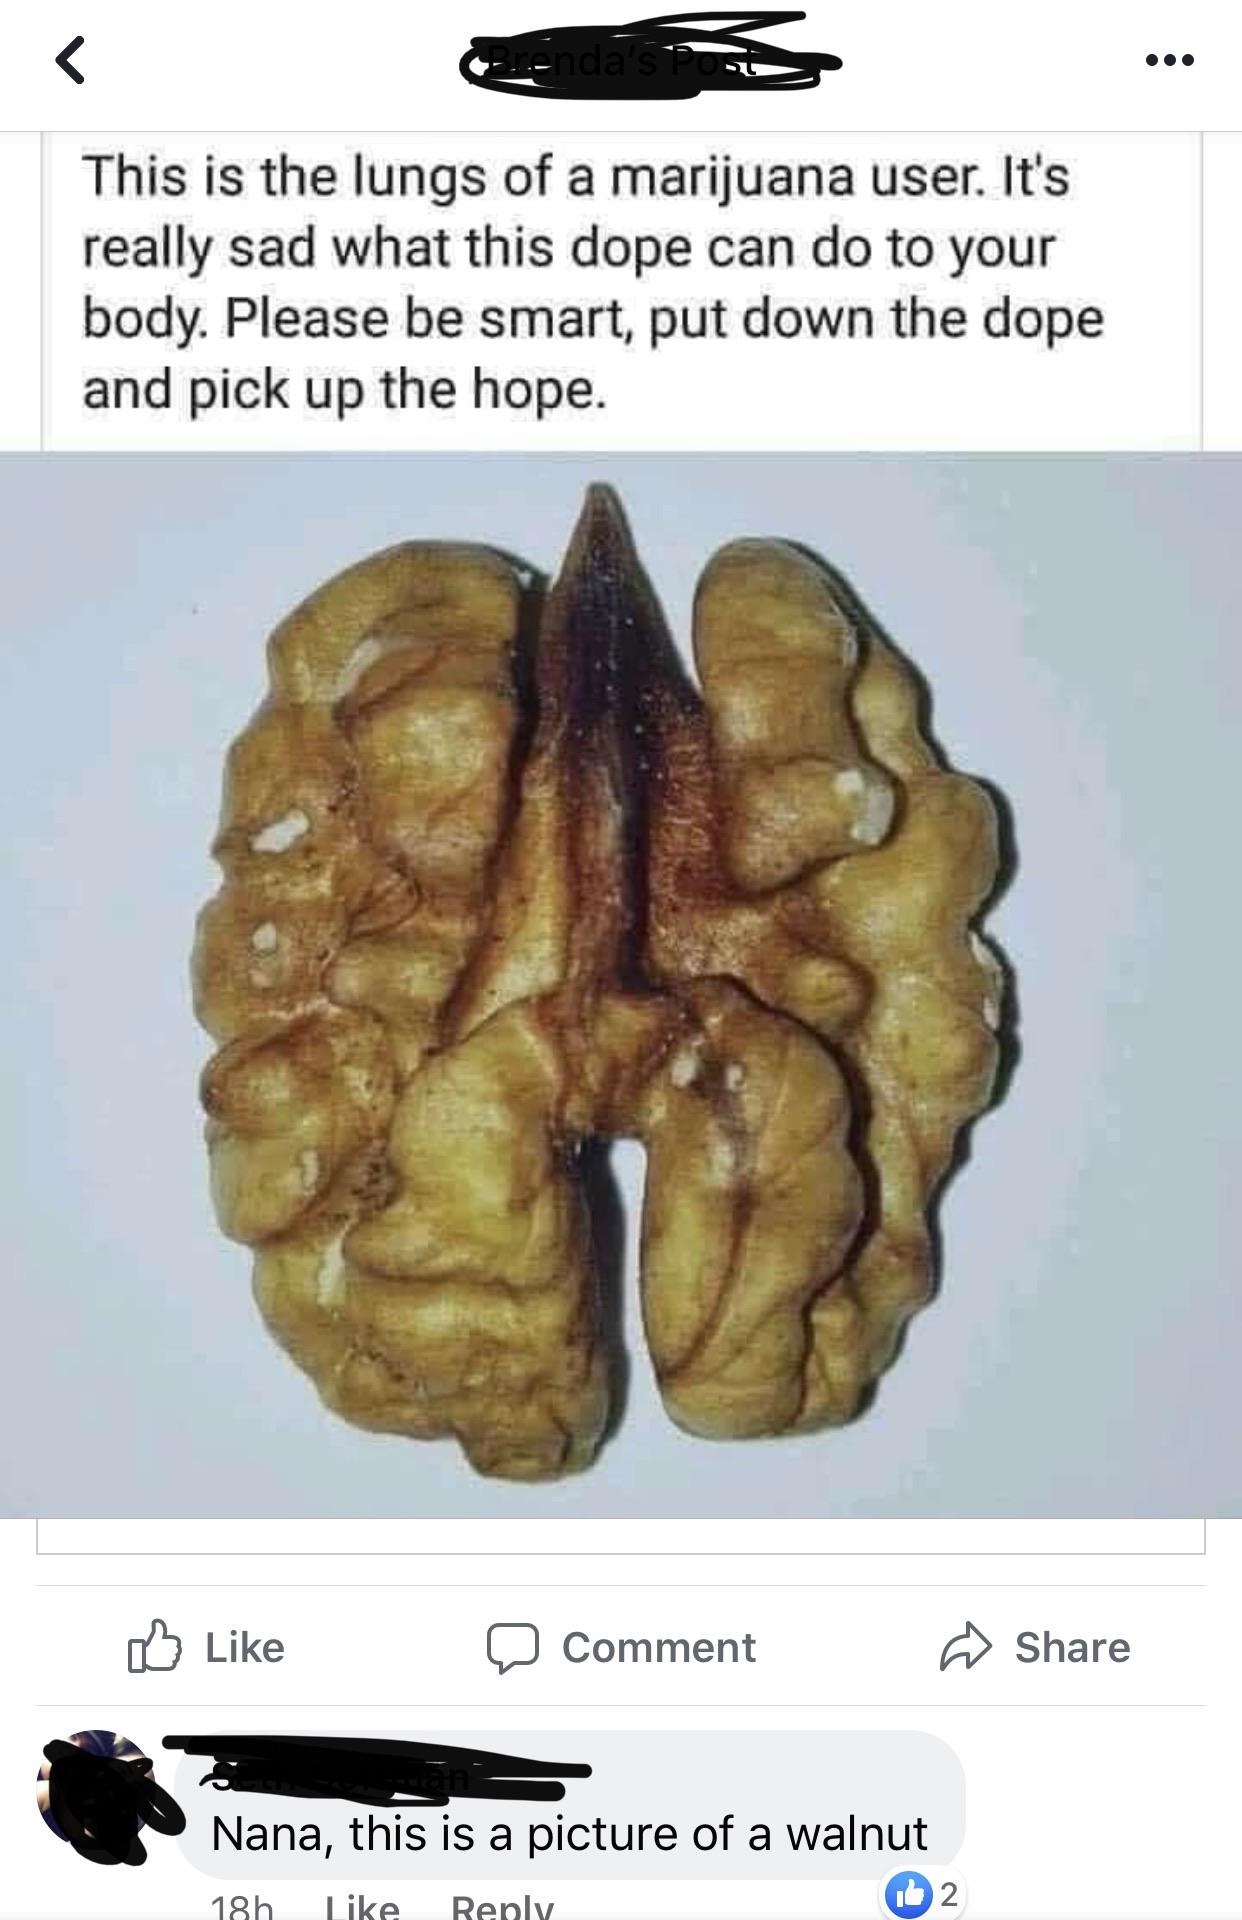 lungs of a marijuana user - 2.nda's Post This is the lungs of a marijuana user. It's really sad what this dope can do to your body. Please be smart, put down the dope and pick up the hope. D Comment Nana, this is a picture of a walnut 18h 2